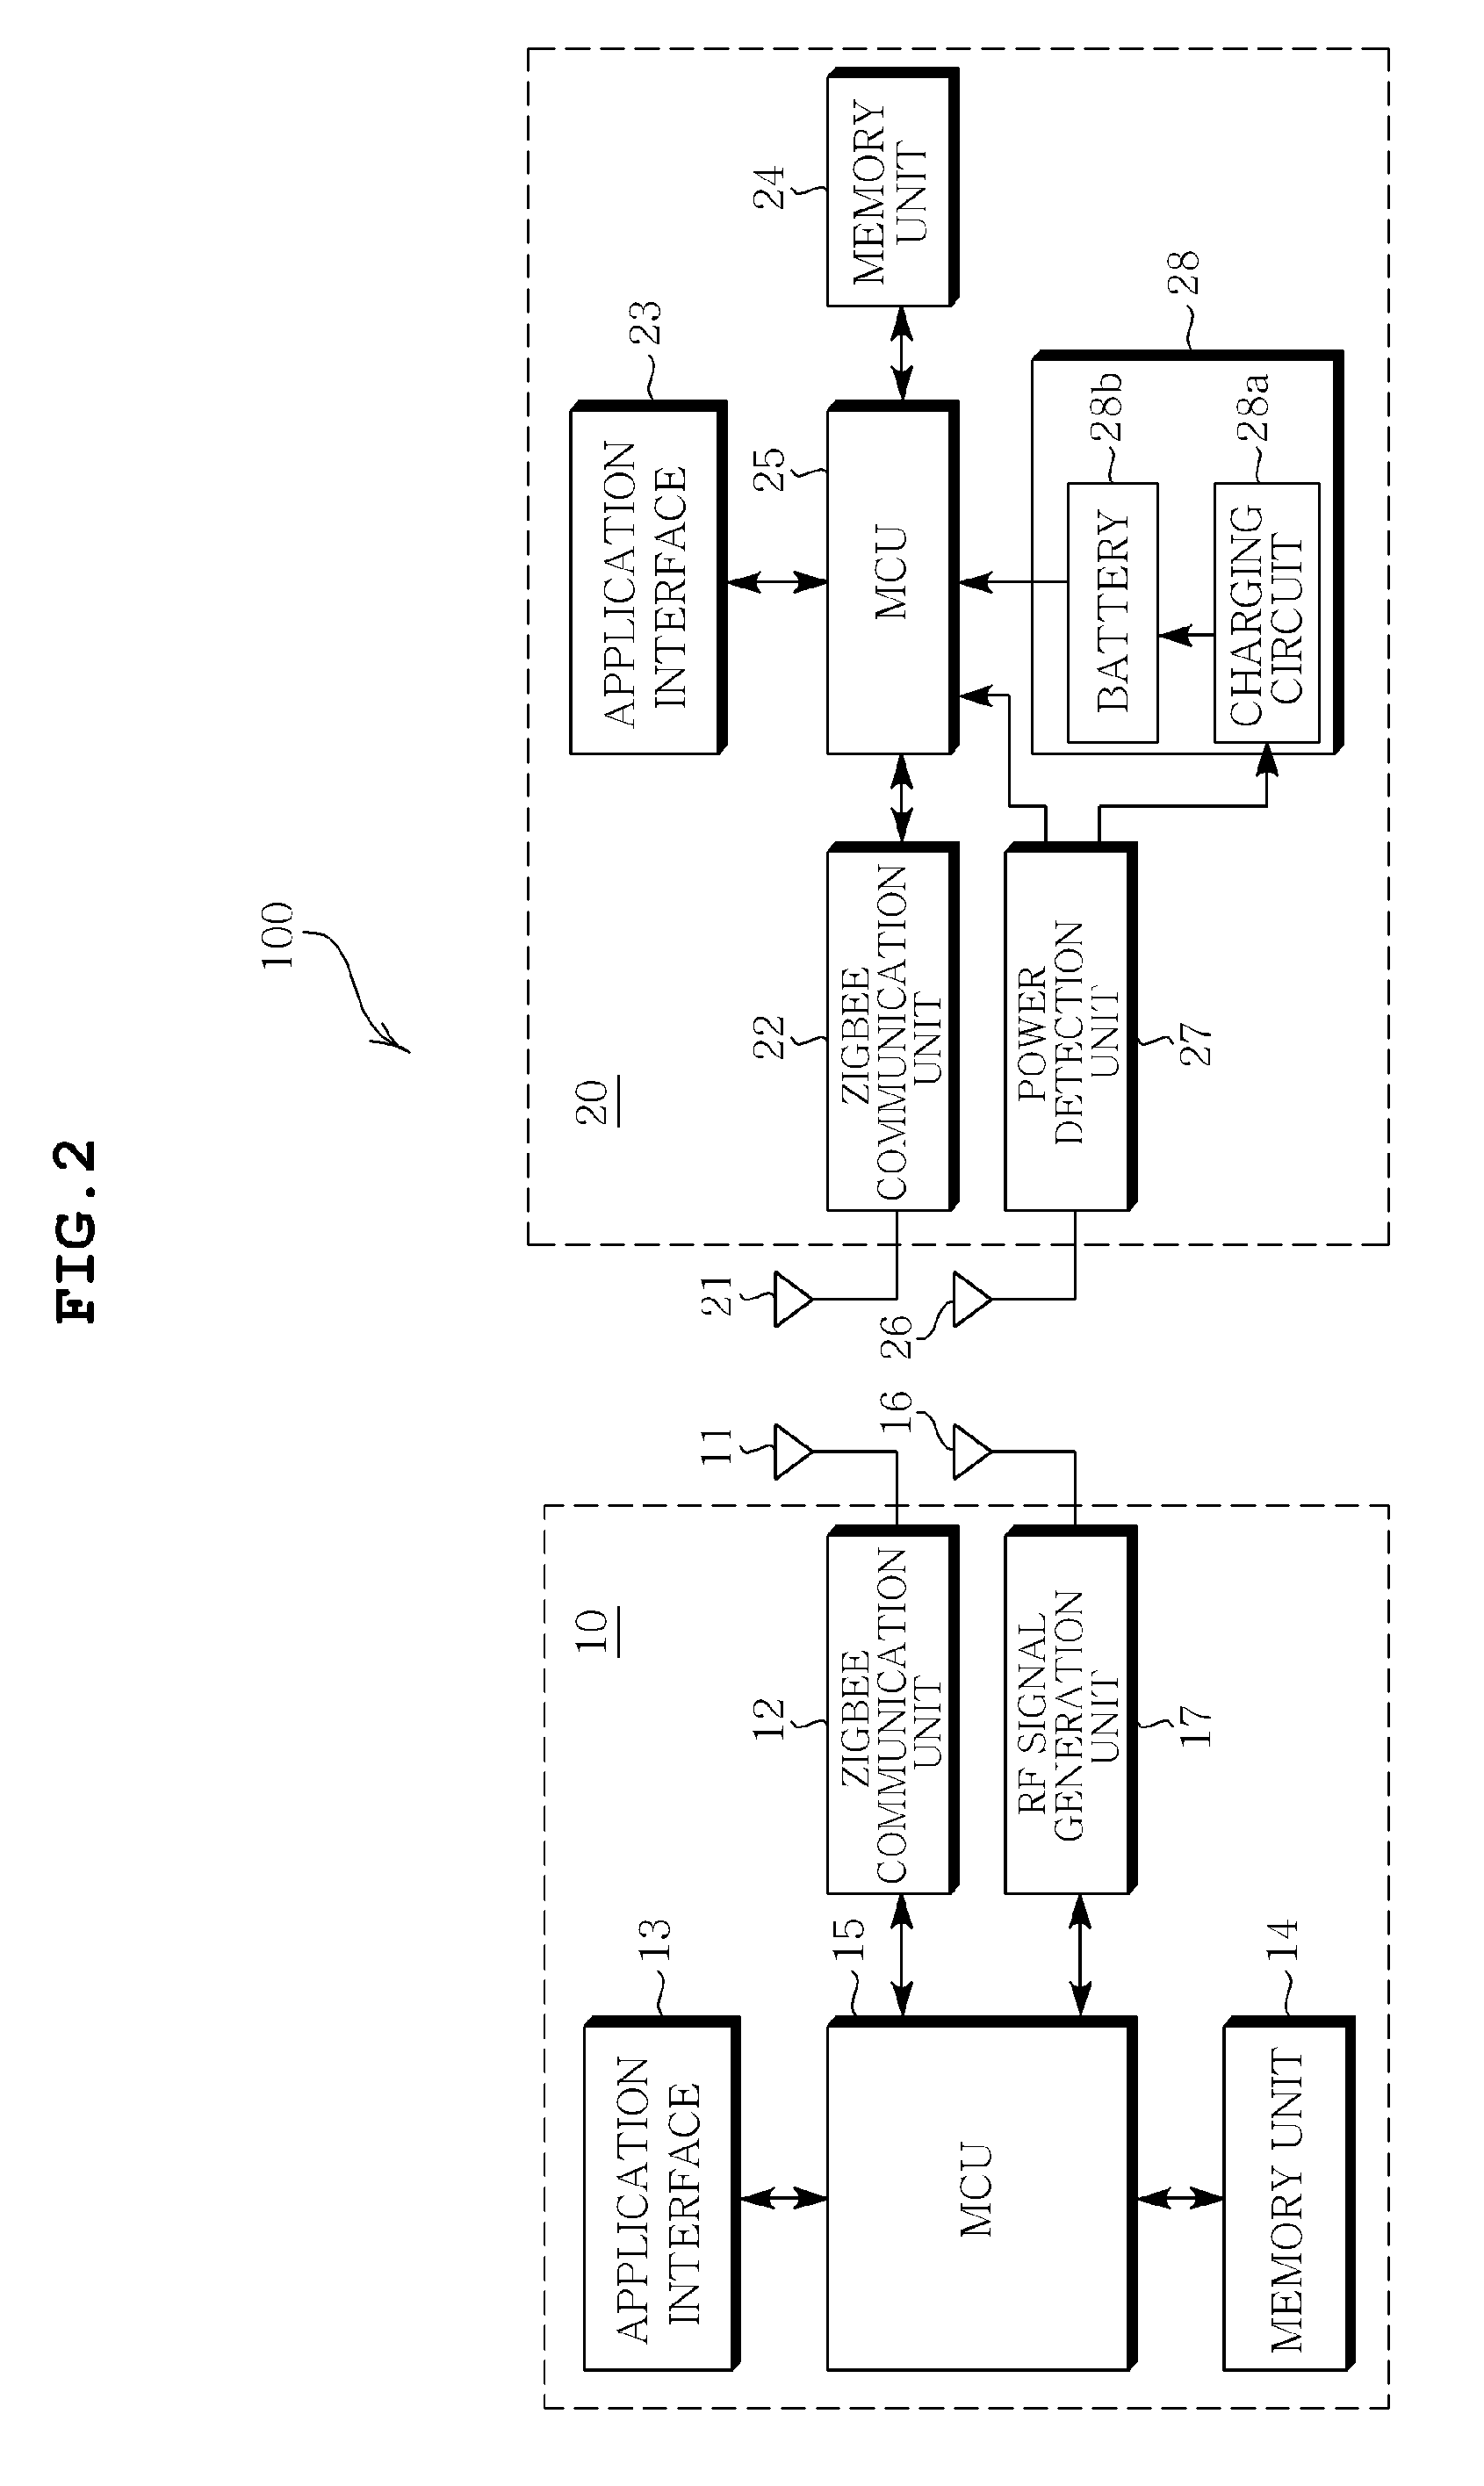 Apparatus and method for low power local area communication using event signal control